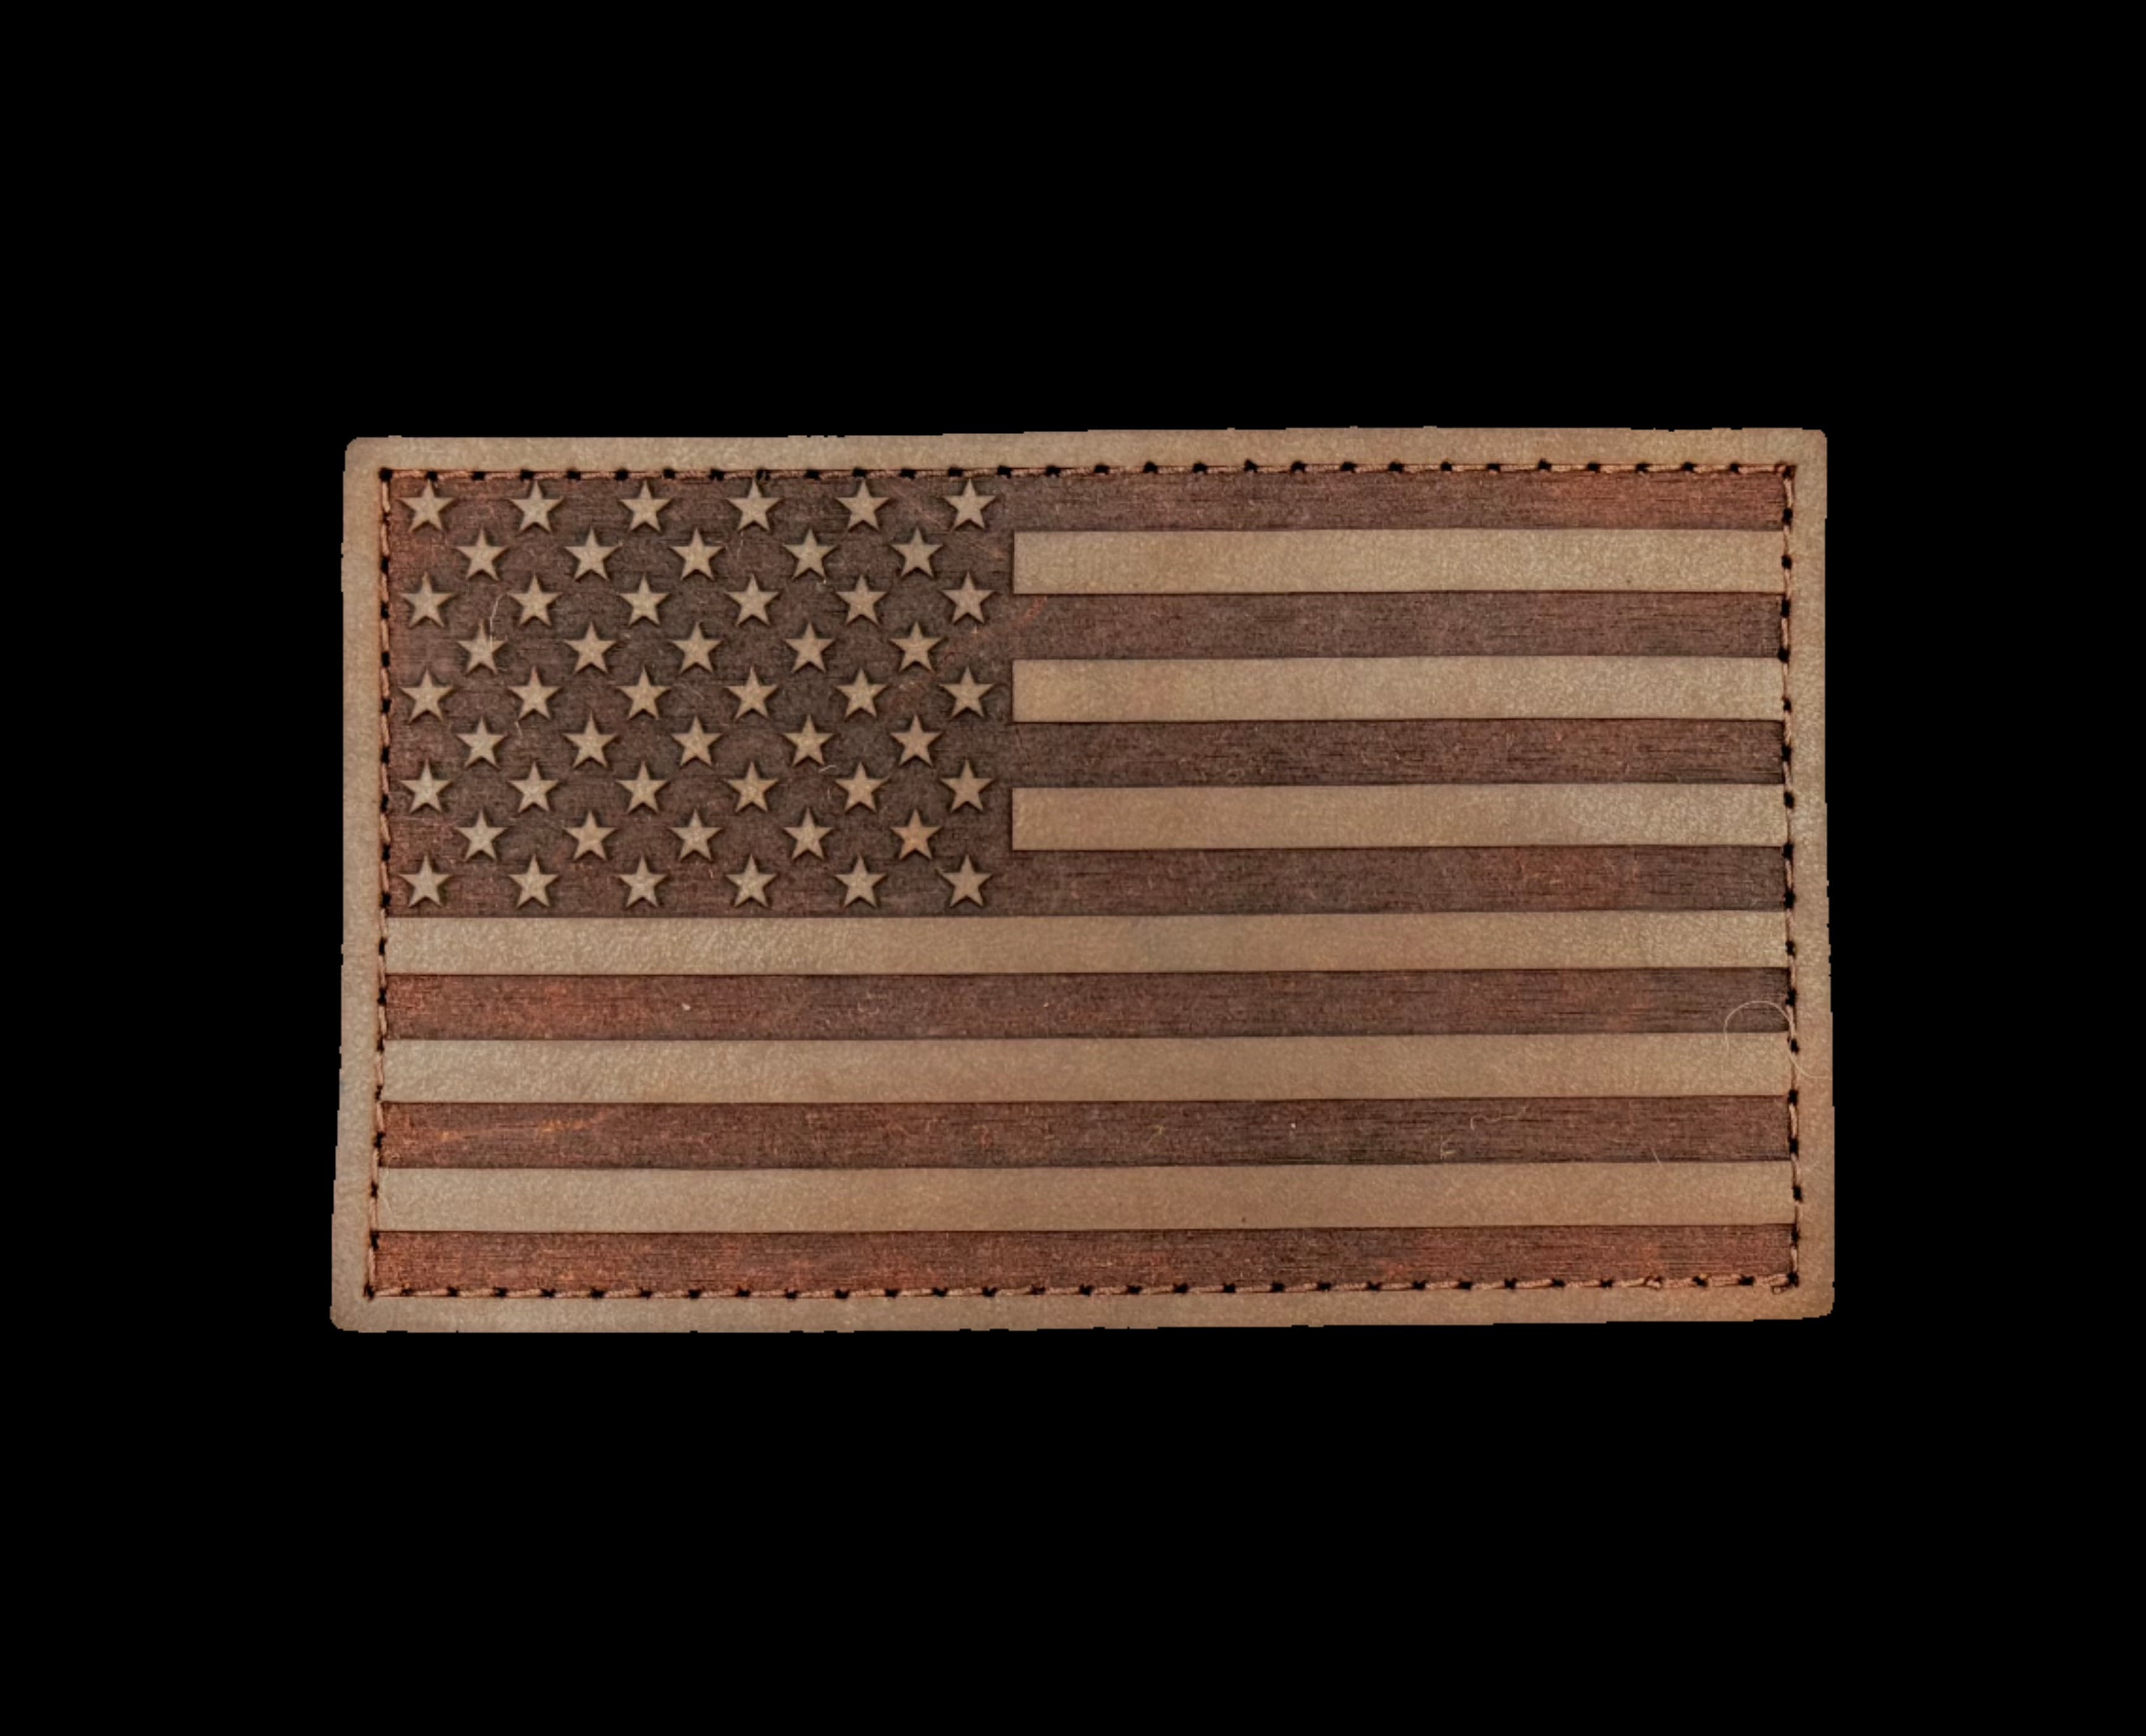 Old Glory Patch